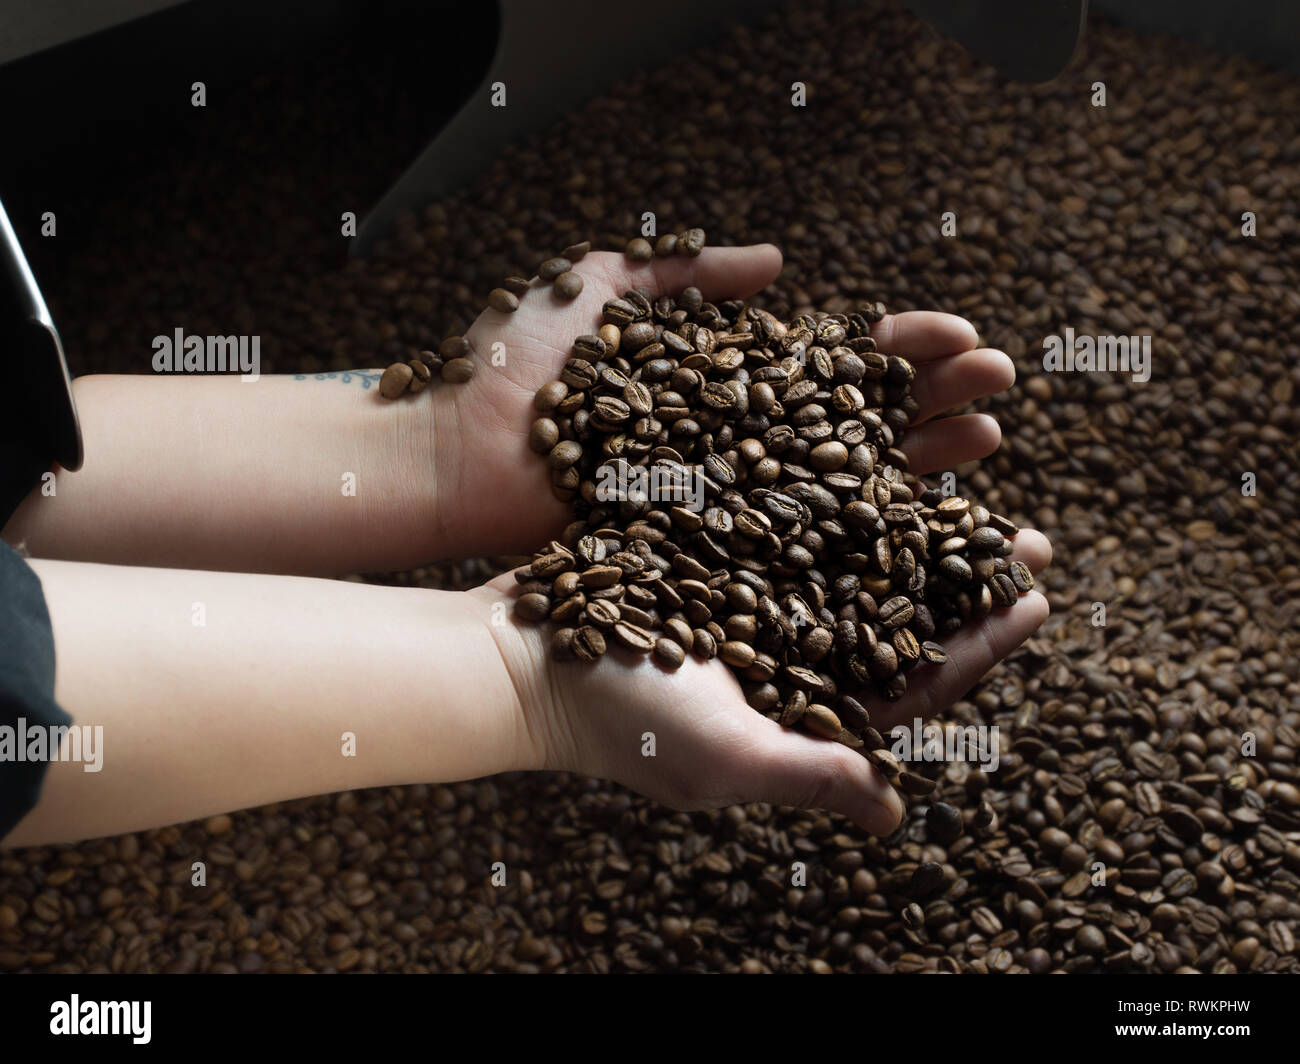 Handful of coffee beans over coffee roaster Stock Photo